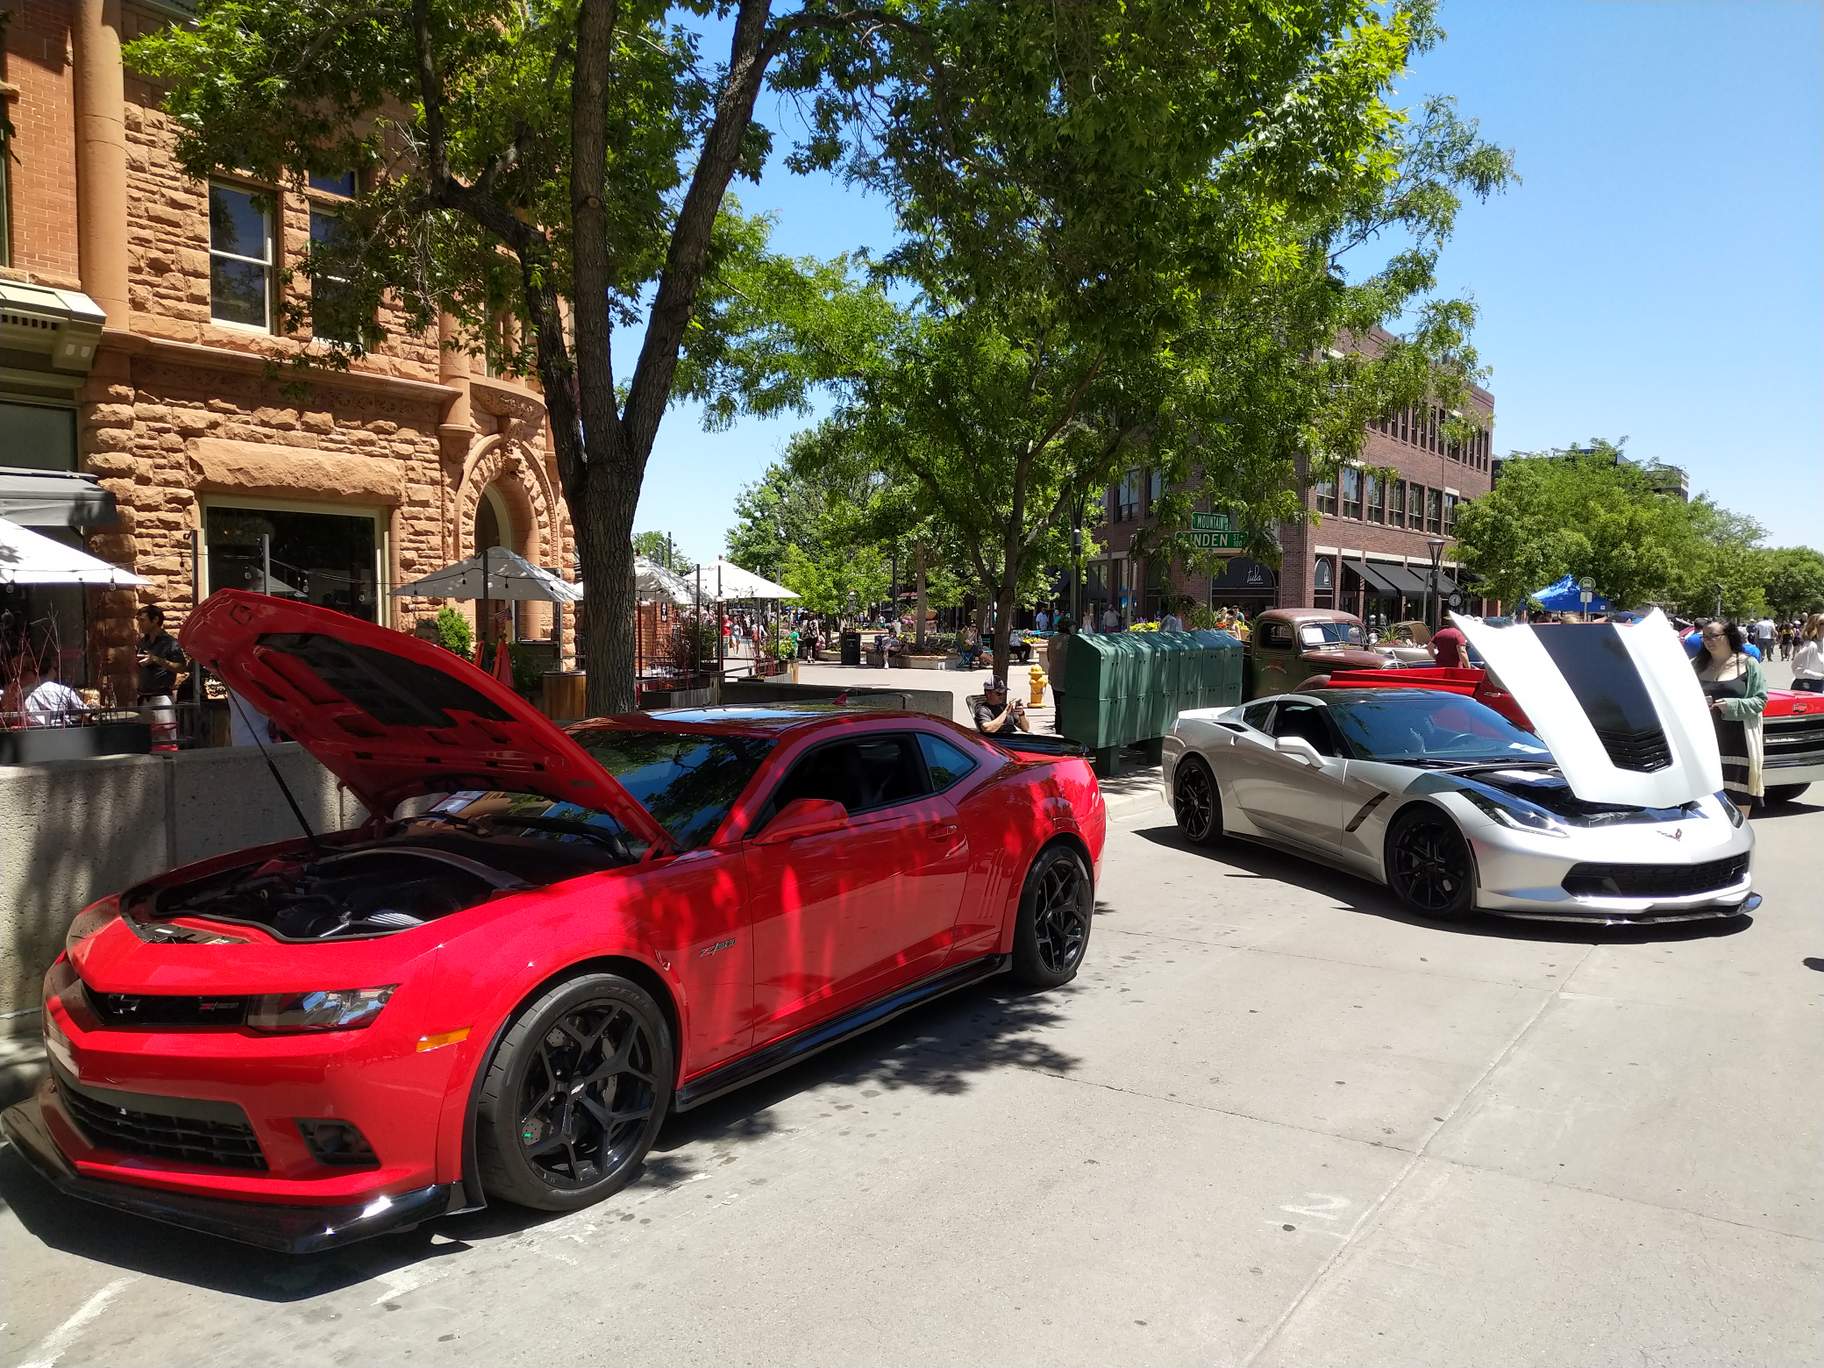 Modern muscle: a red Chevrolet Camaro and seventh-generation Corvette.